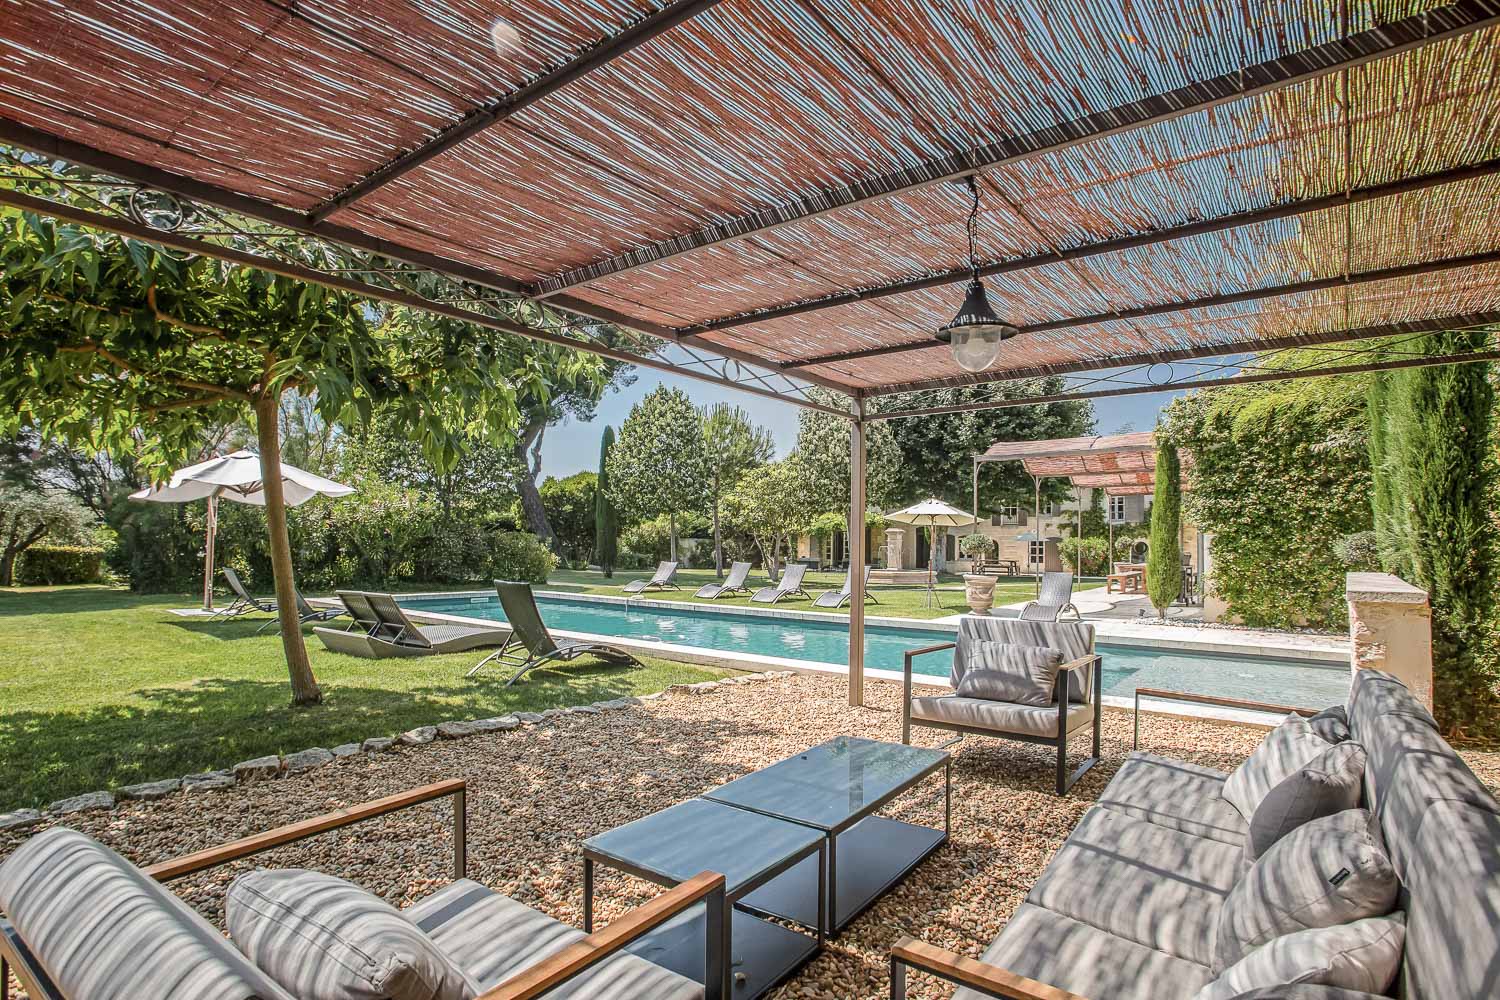 Swimming pool with sitting area - Mas Peyre, St Remy